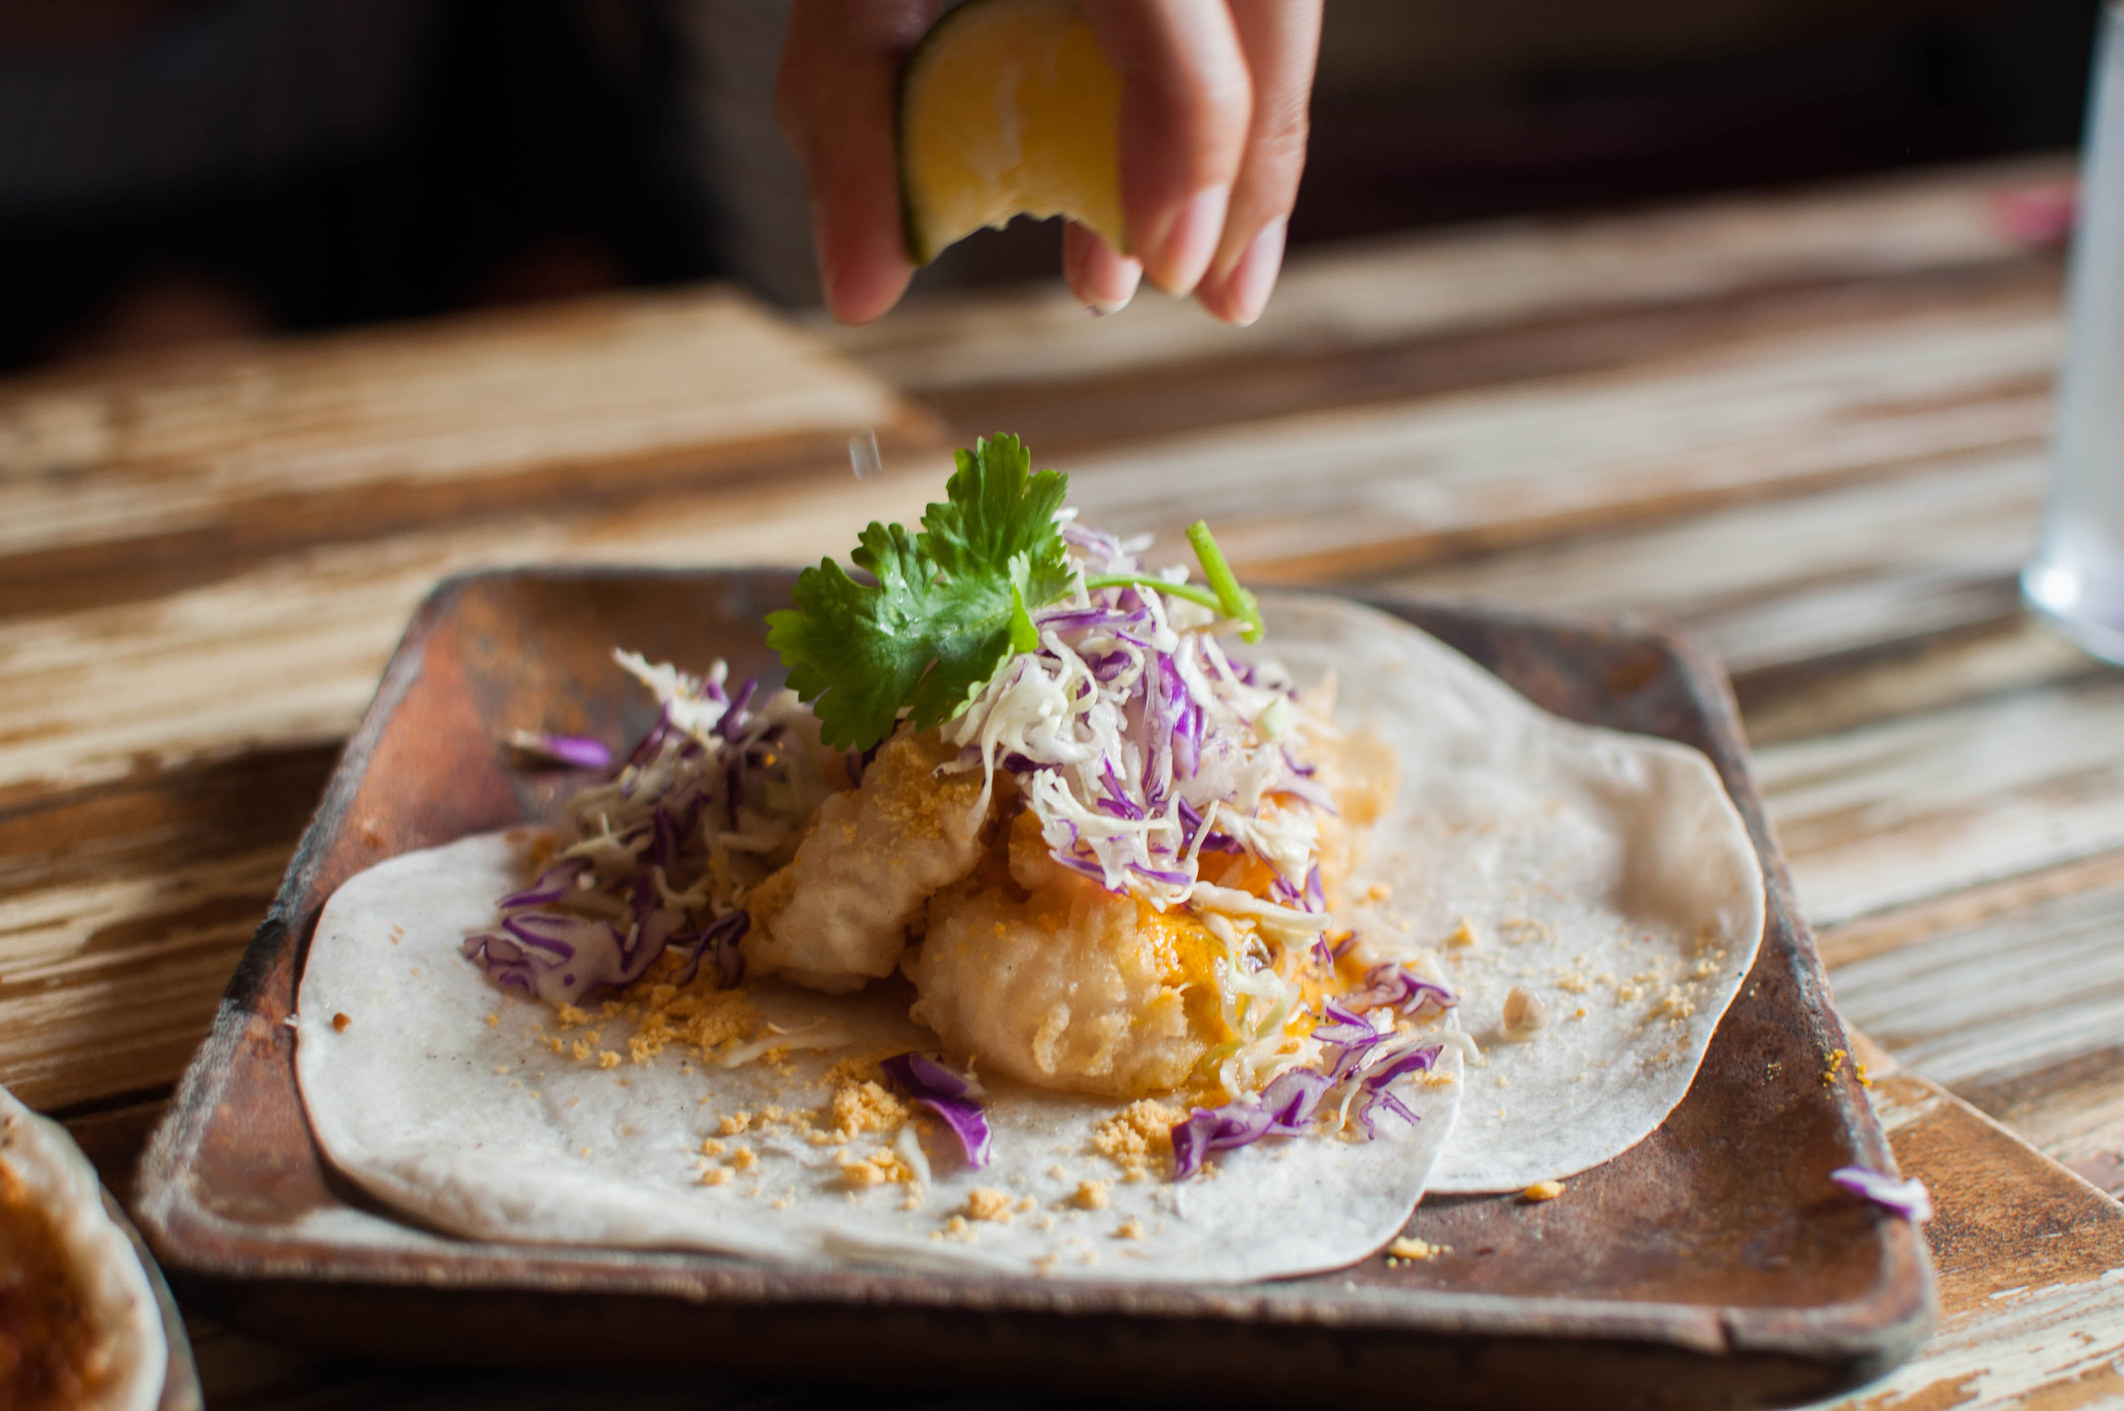 Squeezing lime on a seafood taco topped with slaw and cilantro.